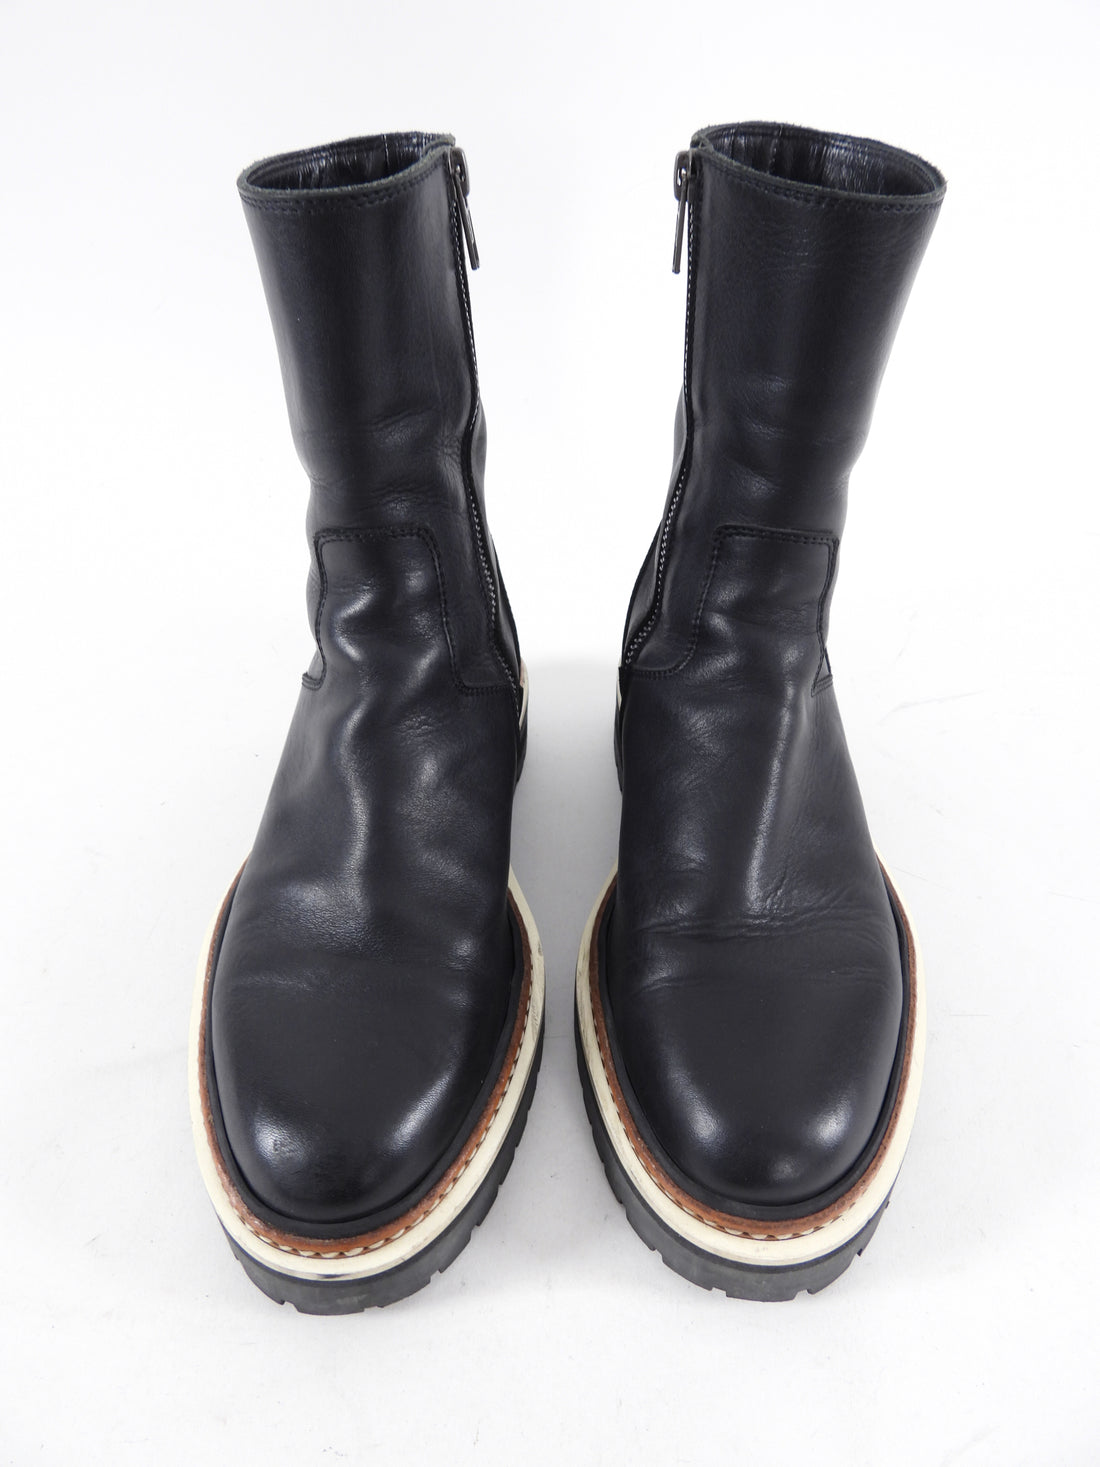 Ann Demeulemeester Black Leather Zip Ankle Boots - 6.5